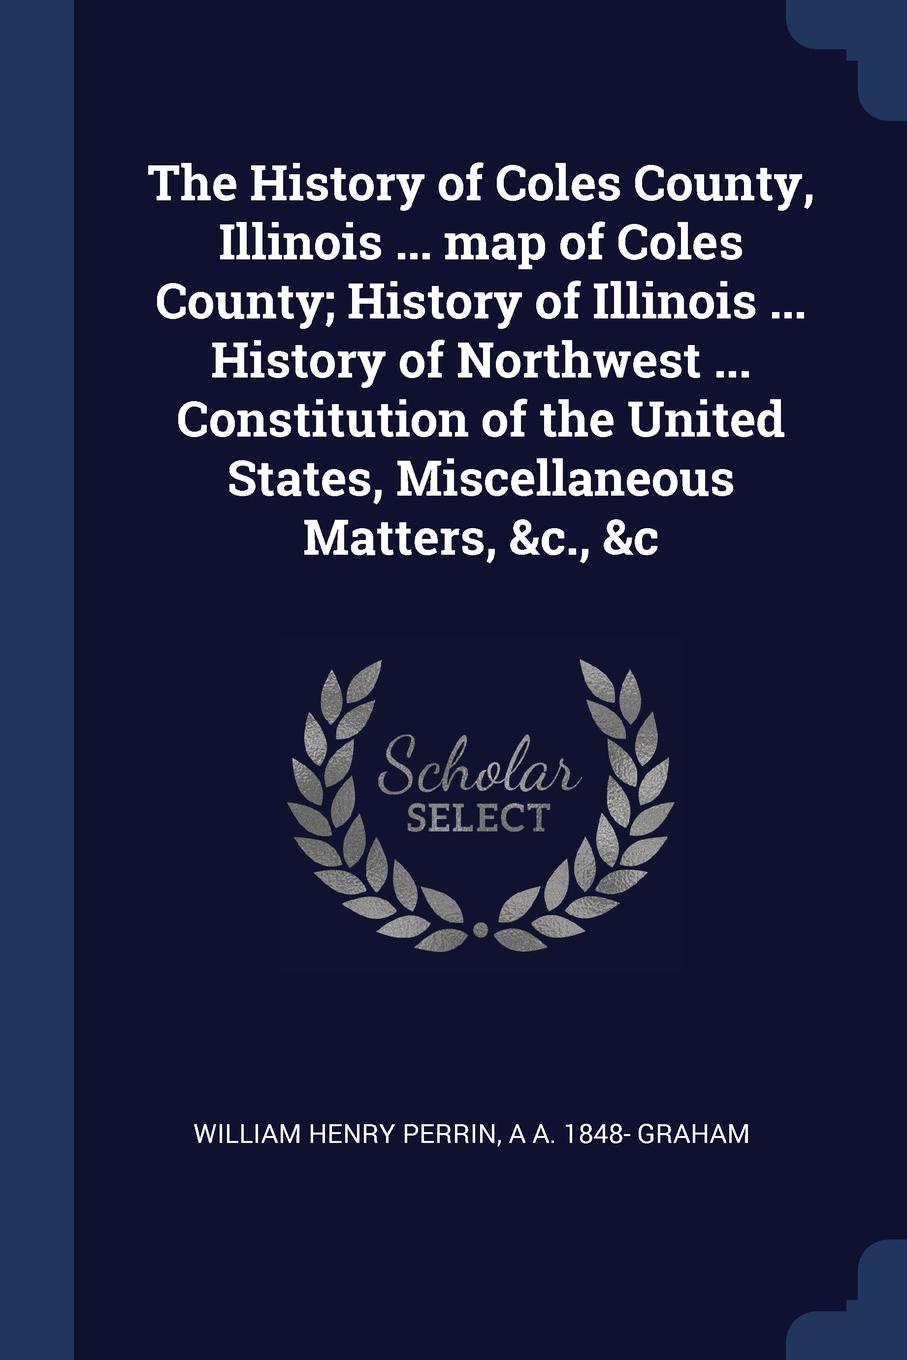 The History of Coles County, Illinois ... map of Coles County; History of Illinois ... History of Northwest ... Constitution of the United States, Miscellaneous Matters, .c., .c